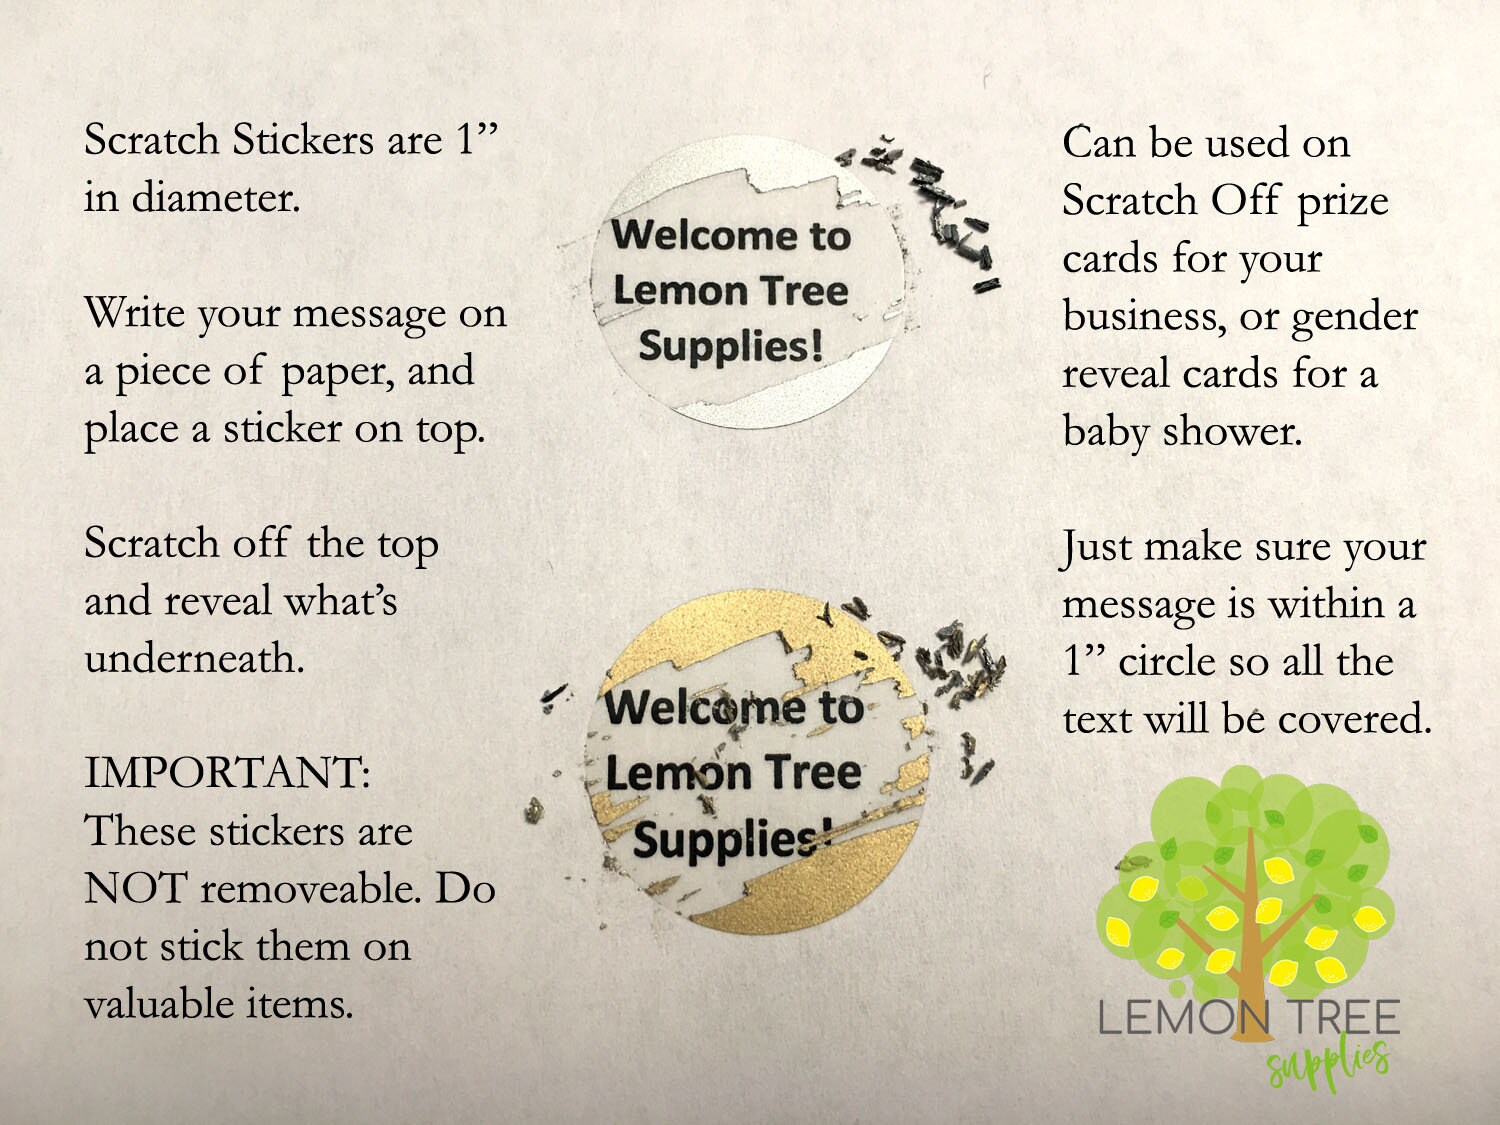 Scratch-off Stickers - 1-Inch Round Holographic Laser Dots Peel